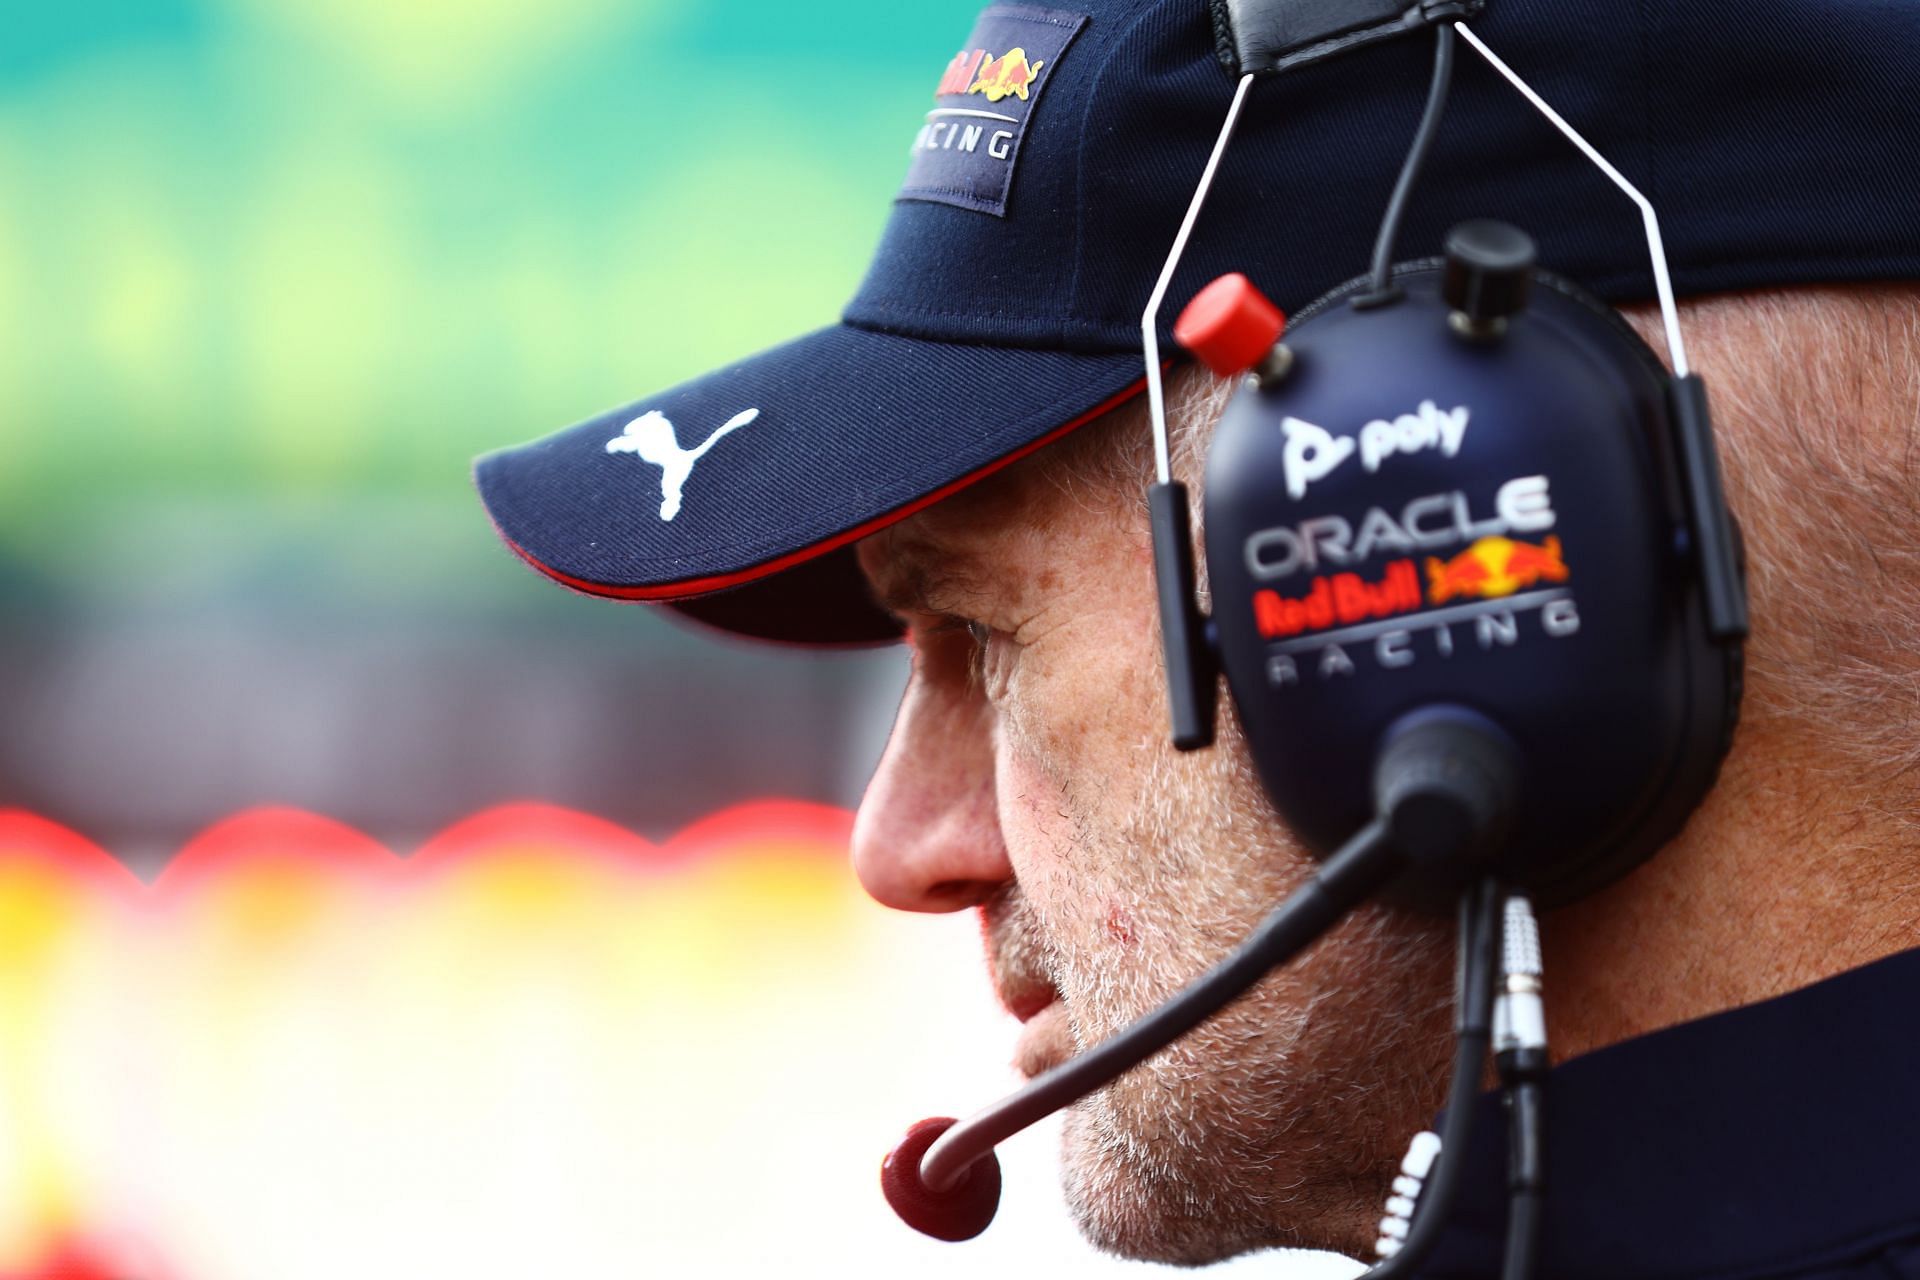 Adrian Newey, the Chief Technical Officer of Red Bull Racing, looks on during Sprint ahead of the F1 Grand Prix of Emilia Romagna (Photo by Mark Thompson/Getty Images)